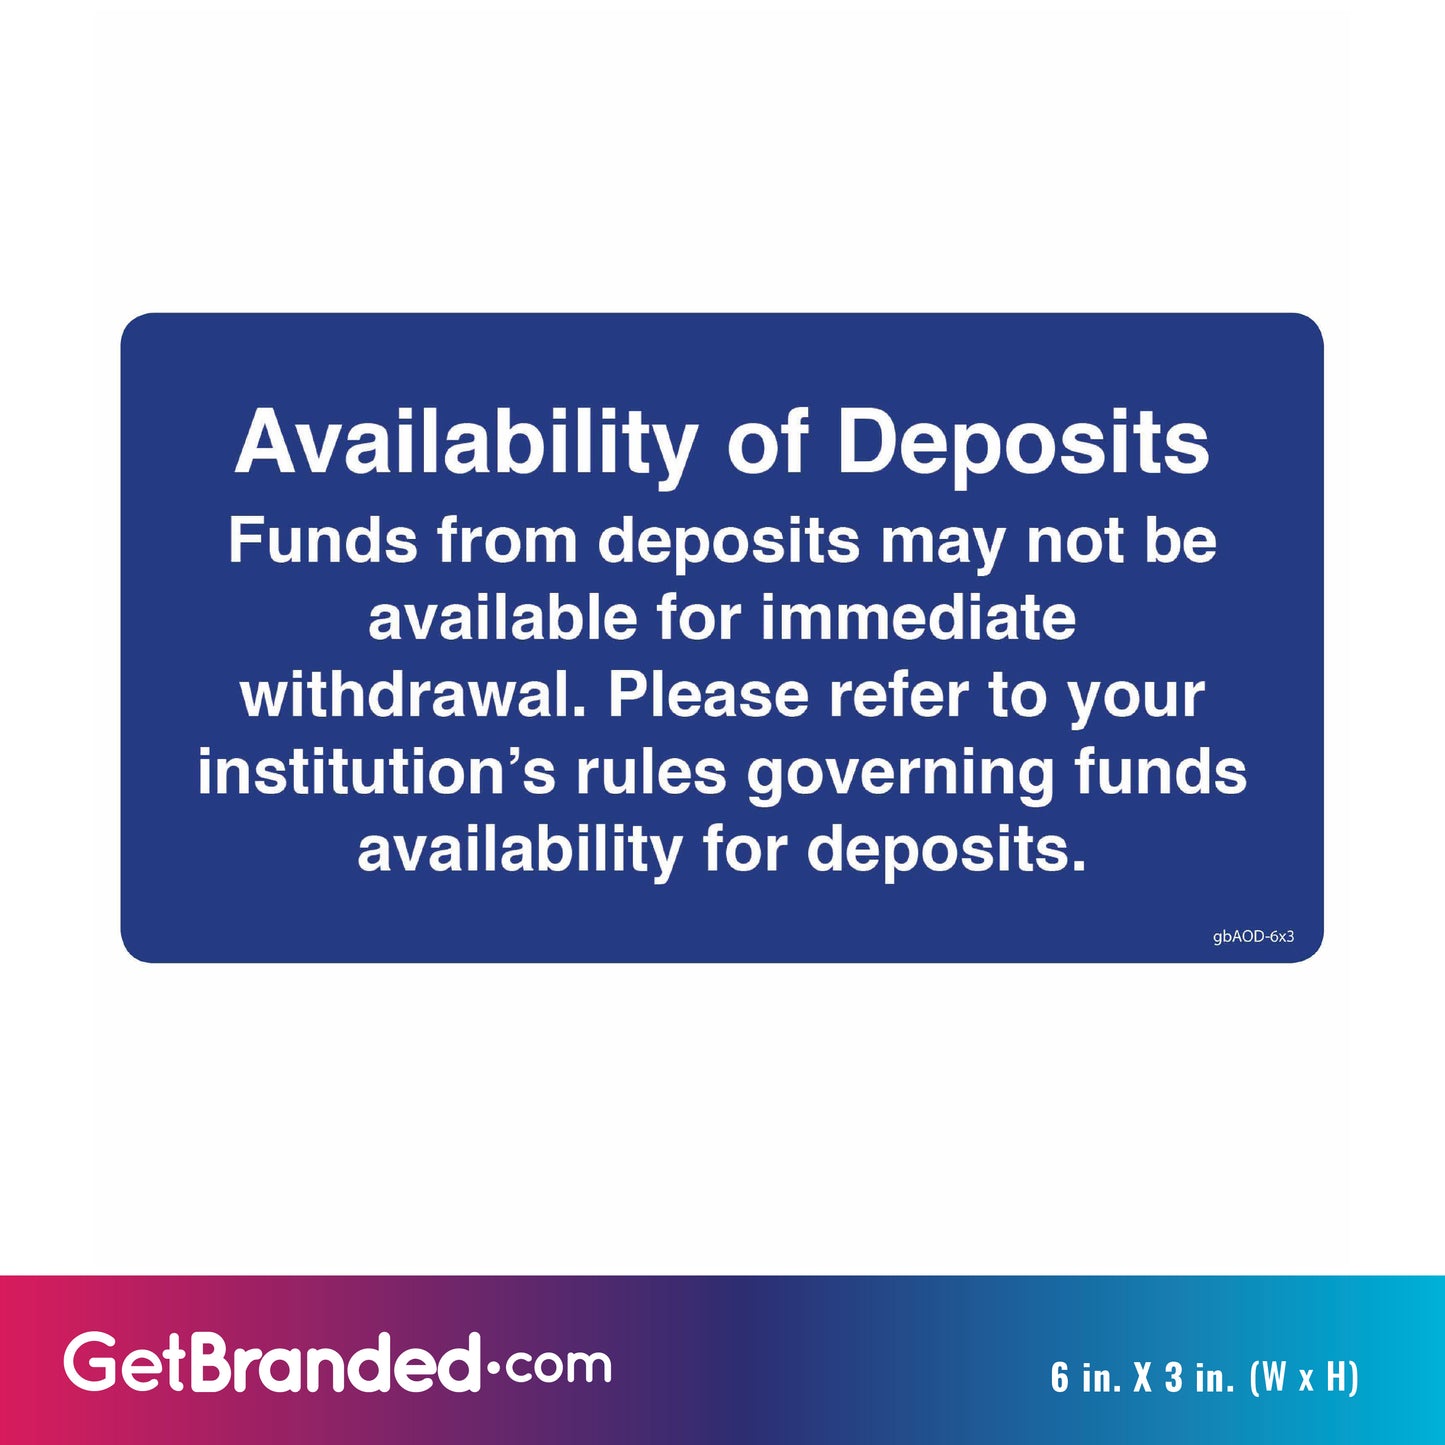 Availability of Deposit Notice Decal size guide. 6 inches by 3 inches in size.